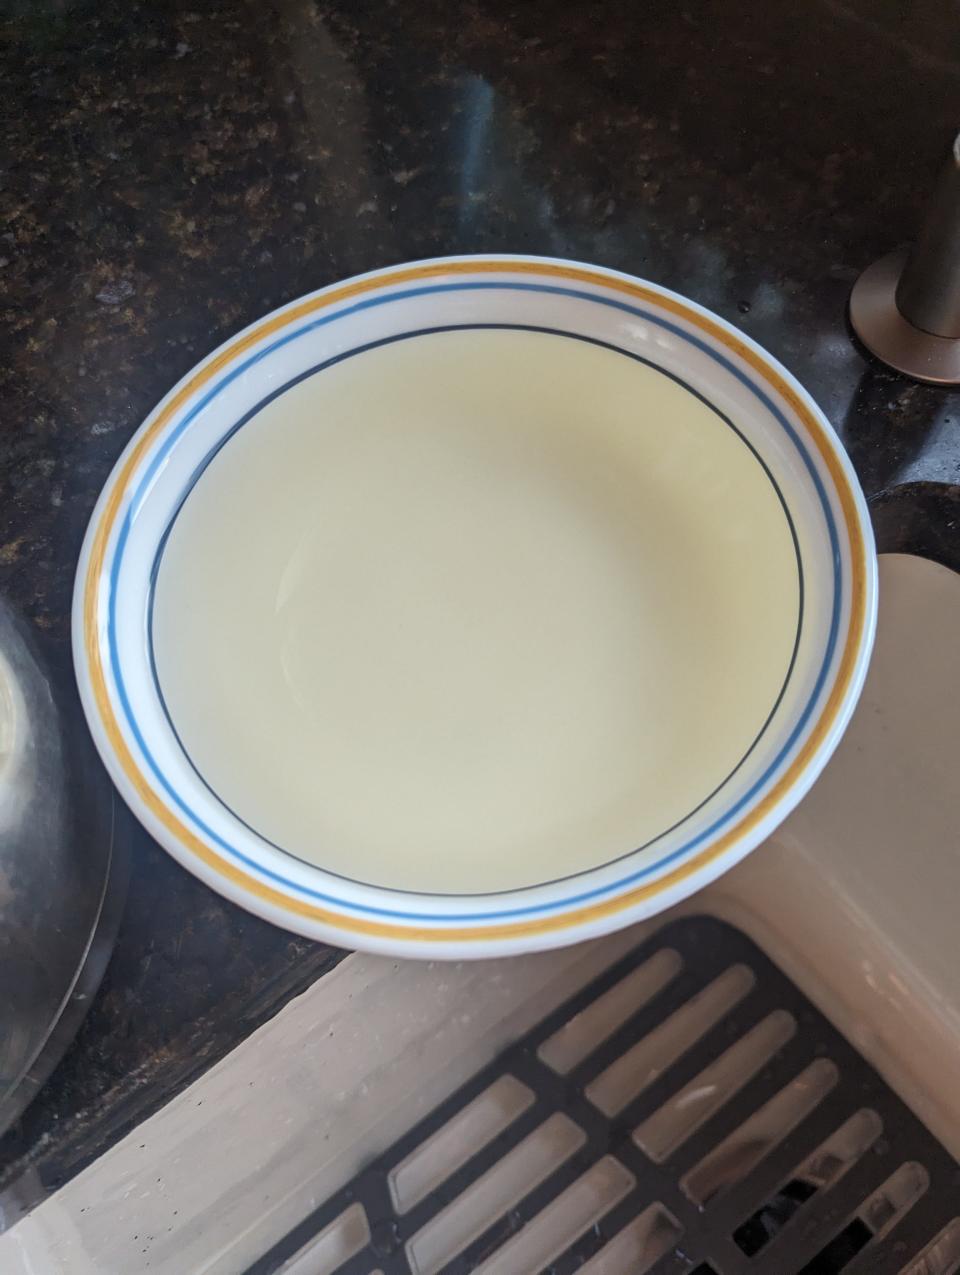 Eckelaert took a photo of his kitchen sink water in a white bowl in order to show the water's discoloration in August 2023.